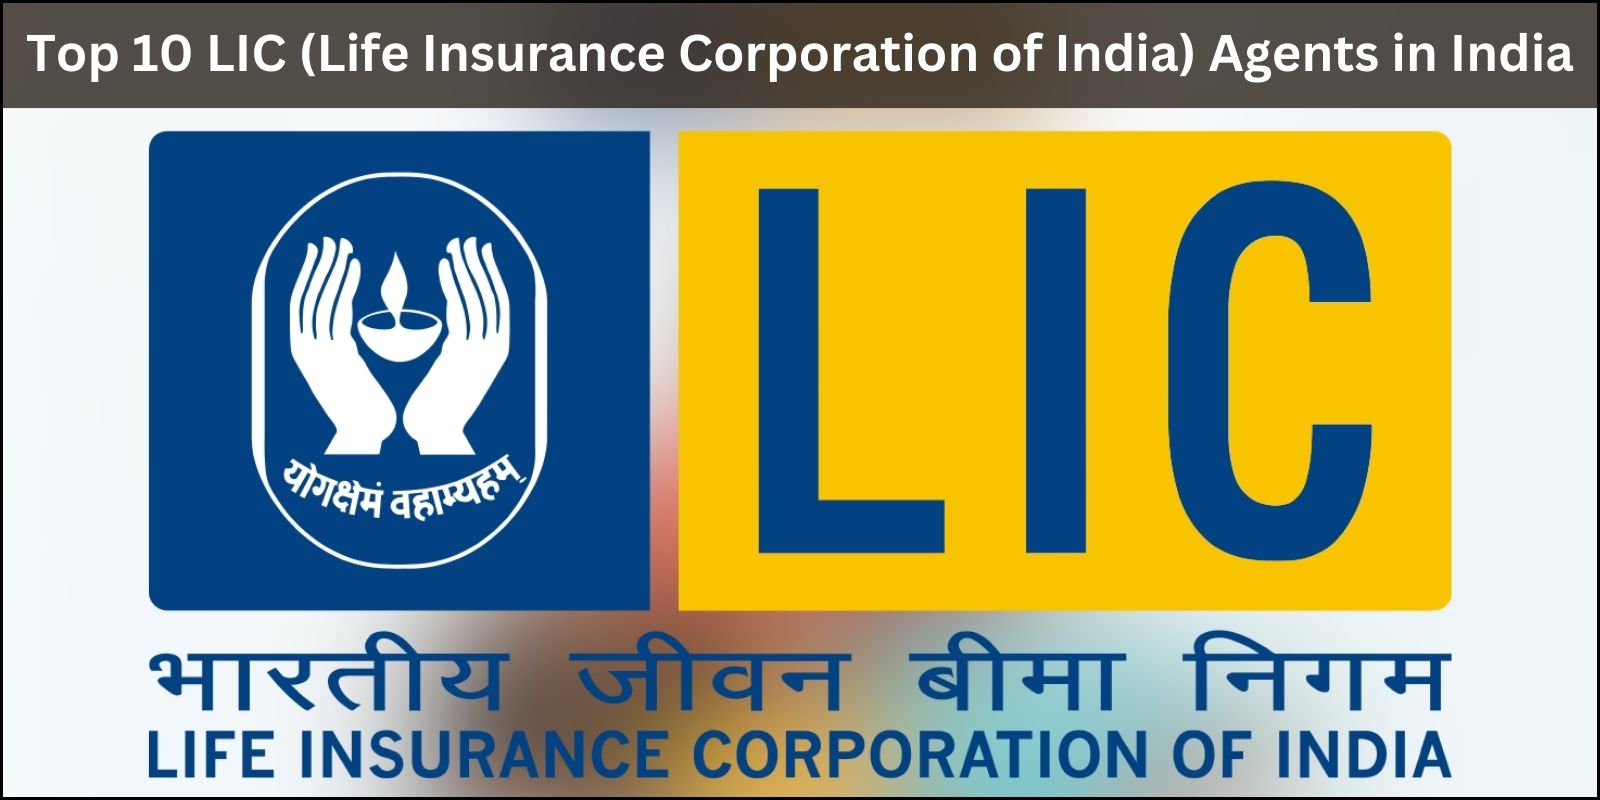 Top 10 LIC (Life Insurance Corporation of India) Agents in India